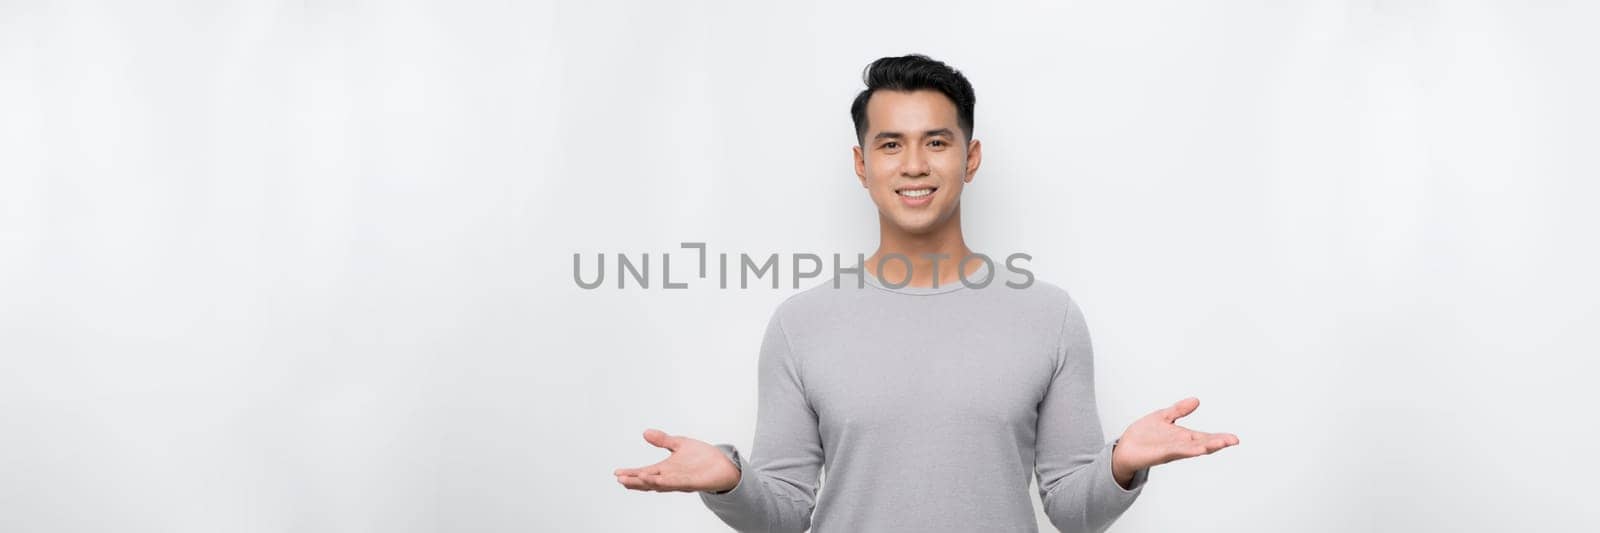  Young man smiling cheerful with open arms as friendly welcome, positive and confident greetings by makidotvn